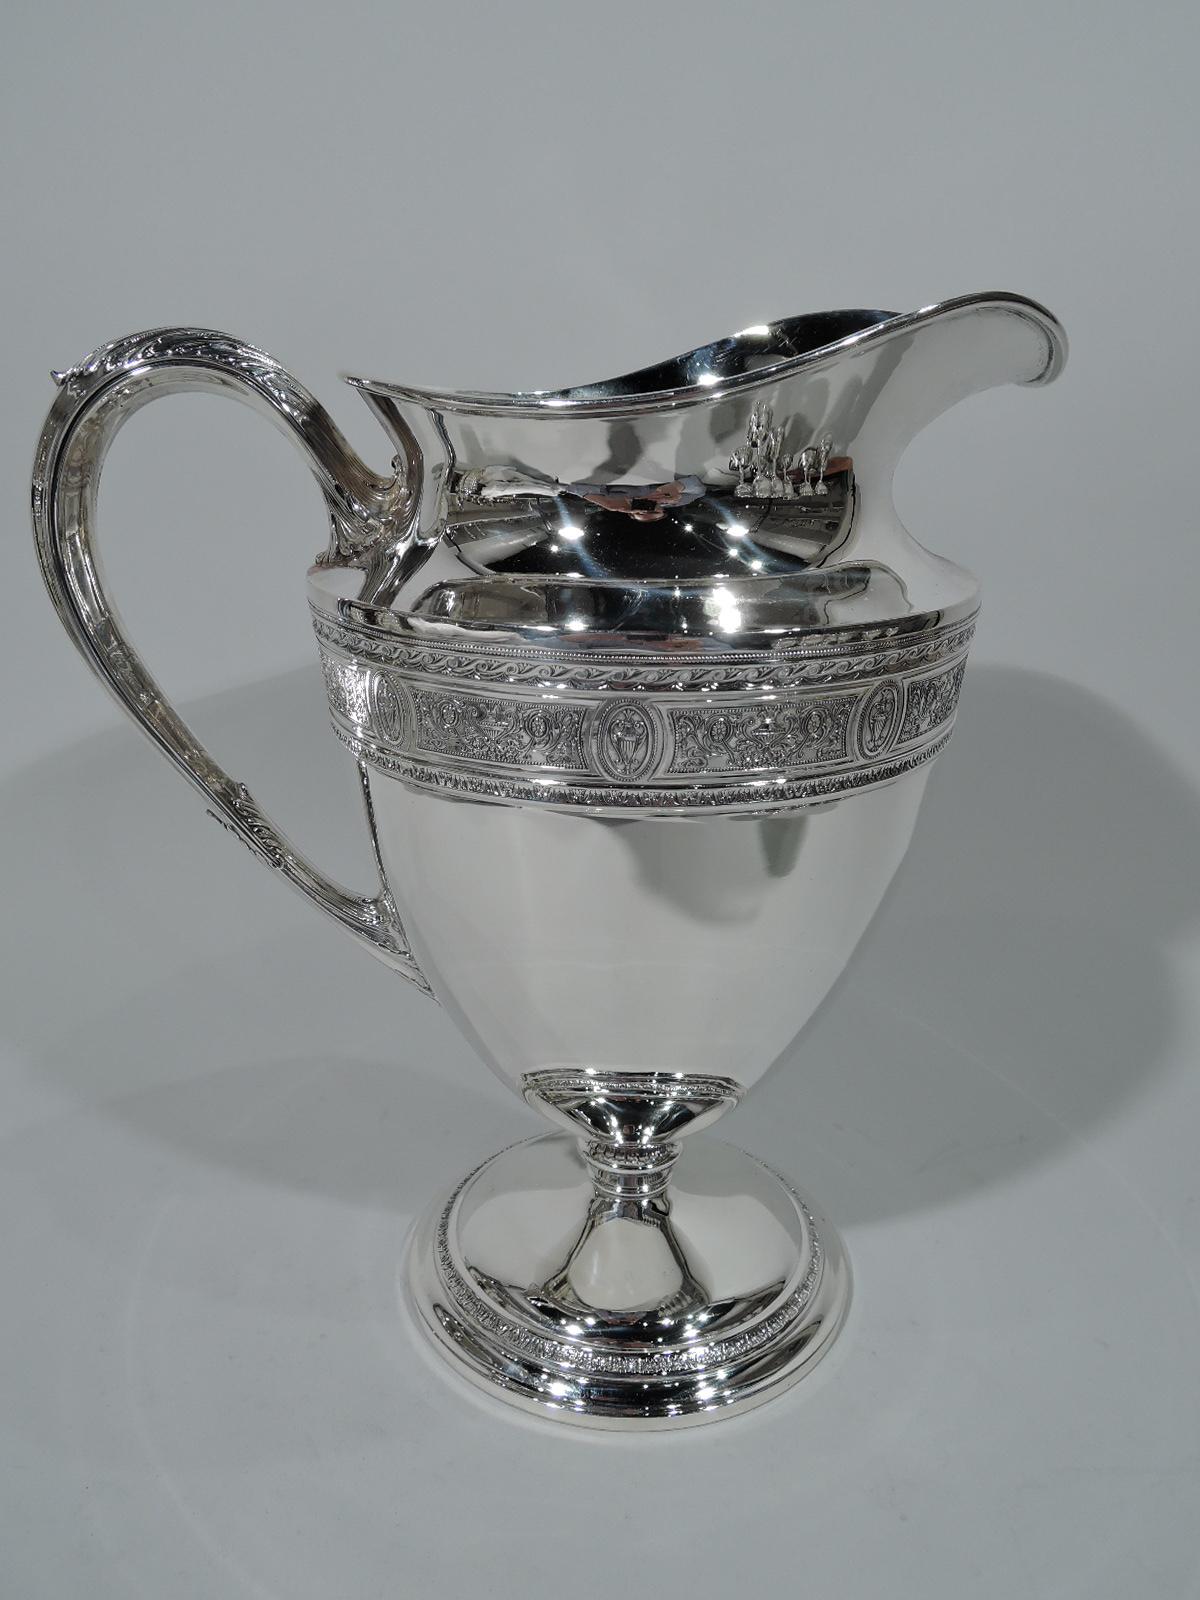 Neoclassical Revival International Wedgwood Sterling Silver Set with Pitcher & 12 Goblets